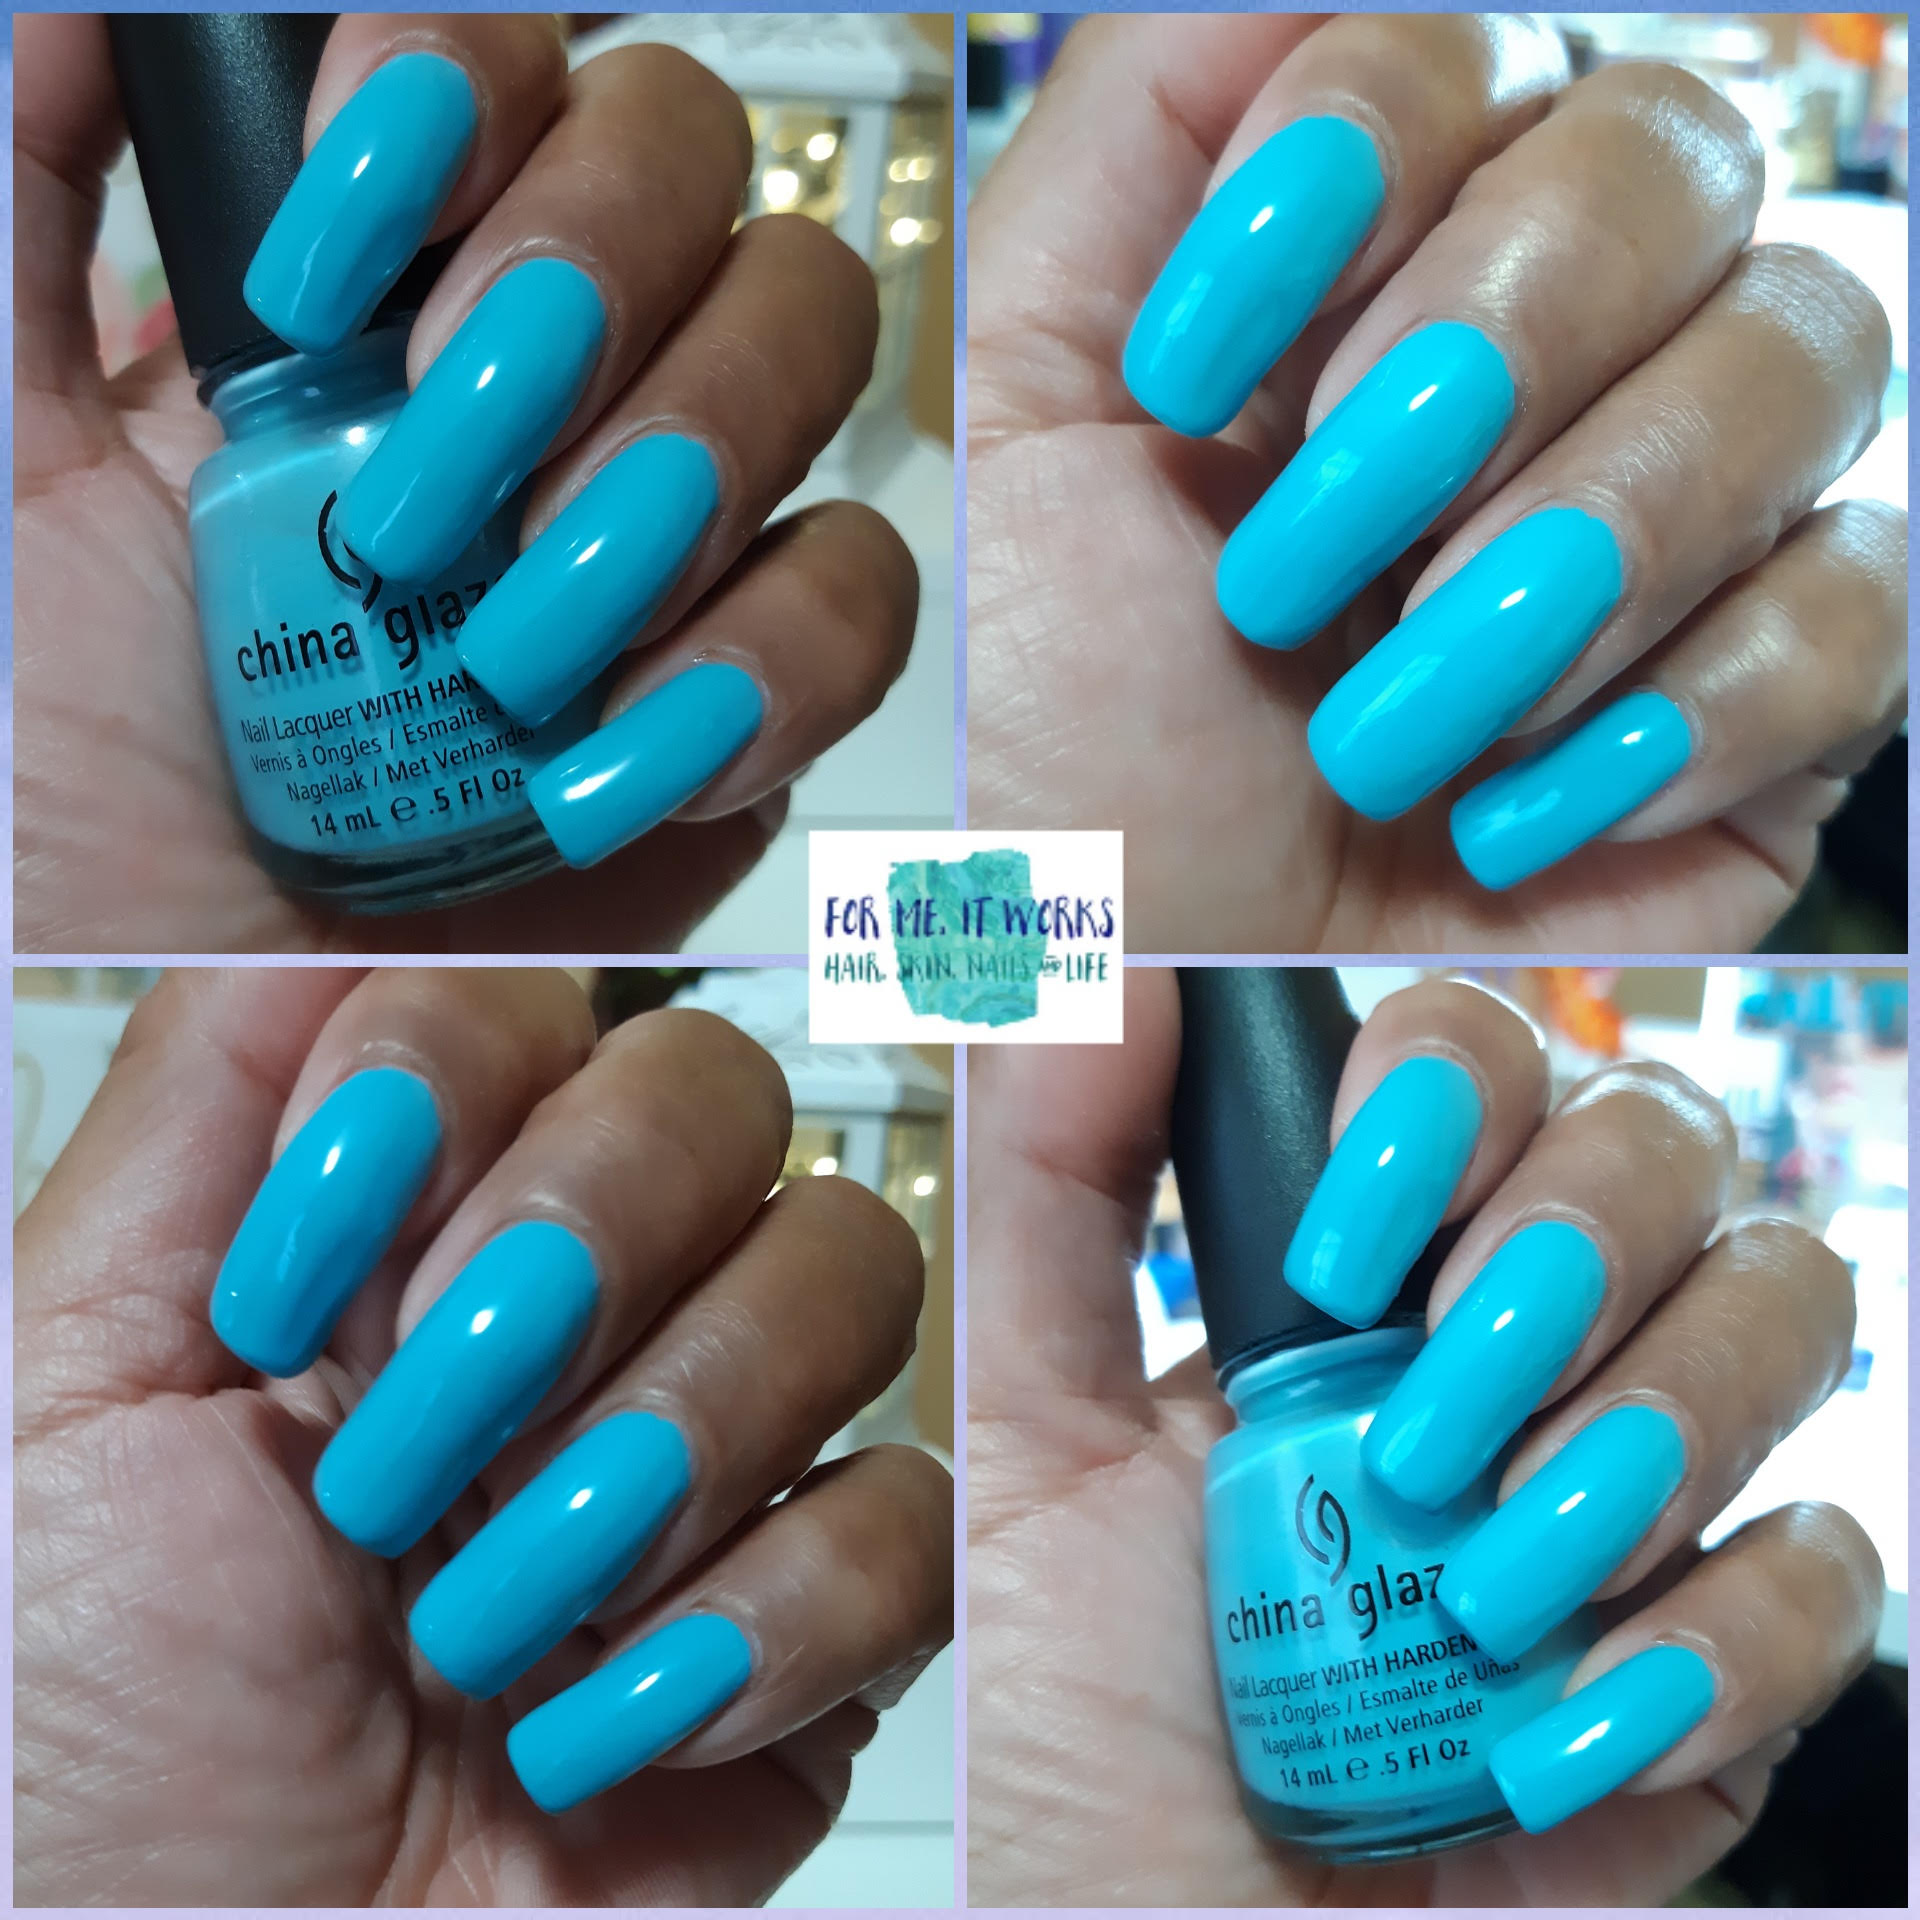 Top 6 Blue Nail Polishes for Summer! Response Post - Shades of Beauty, Inc.